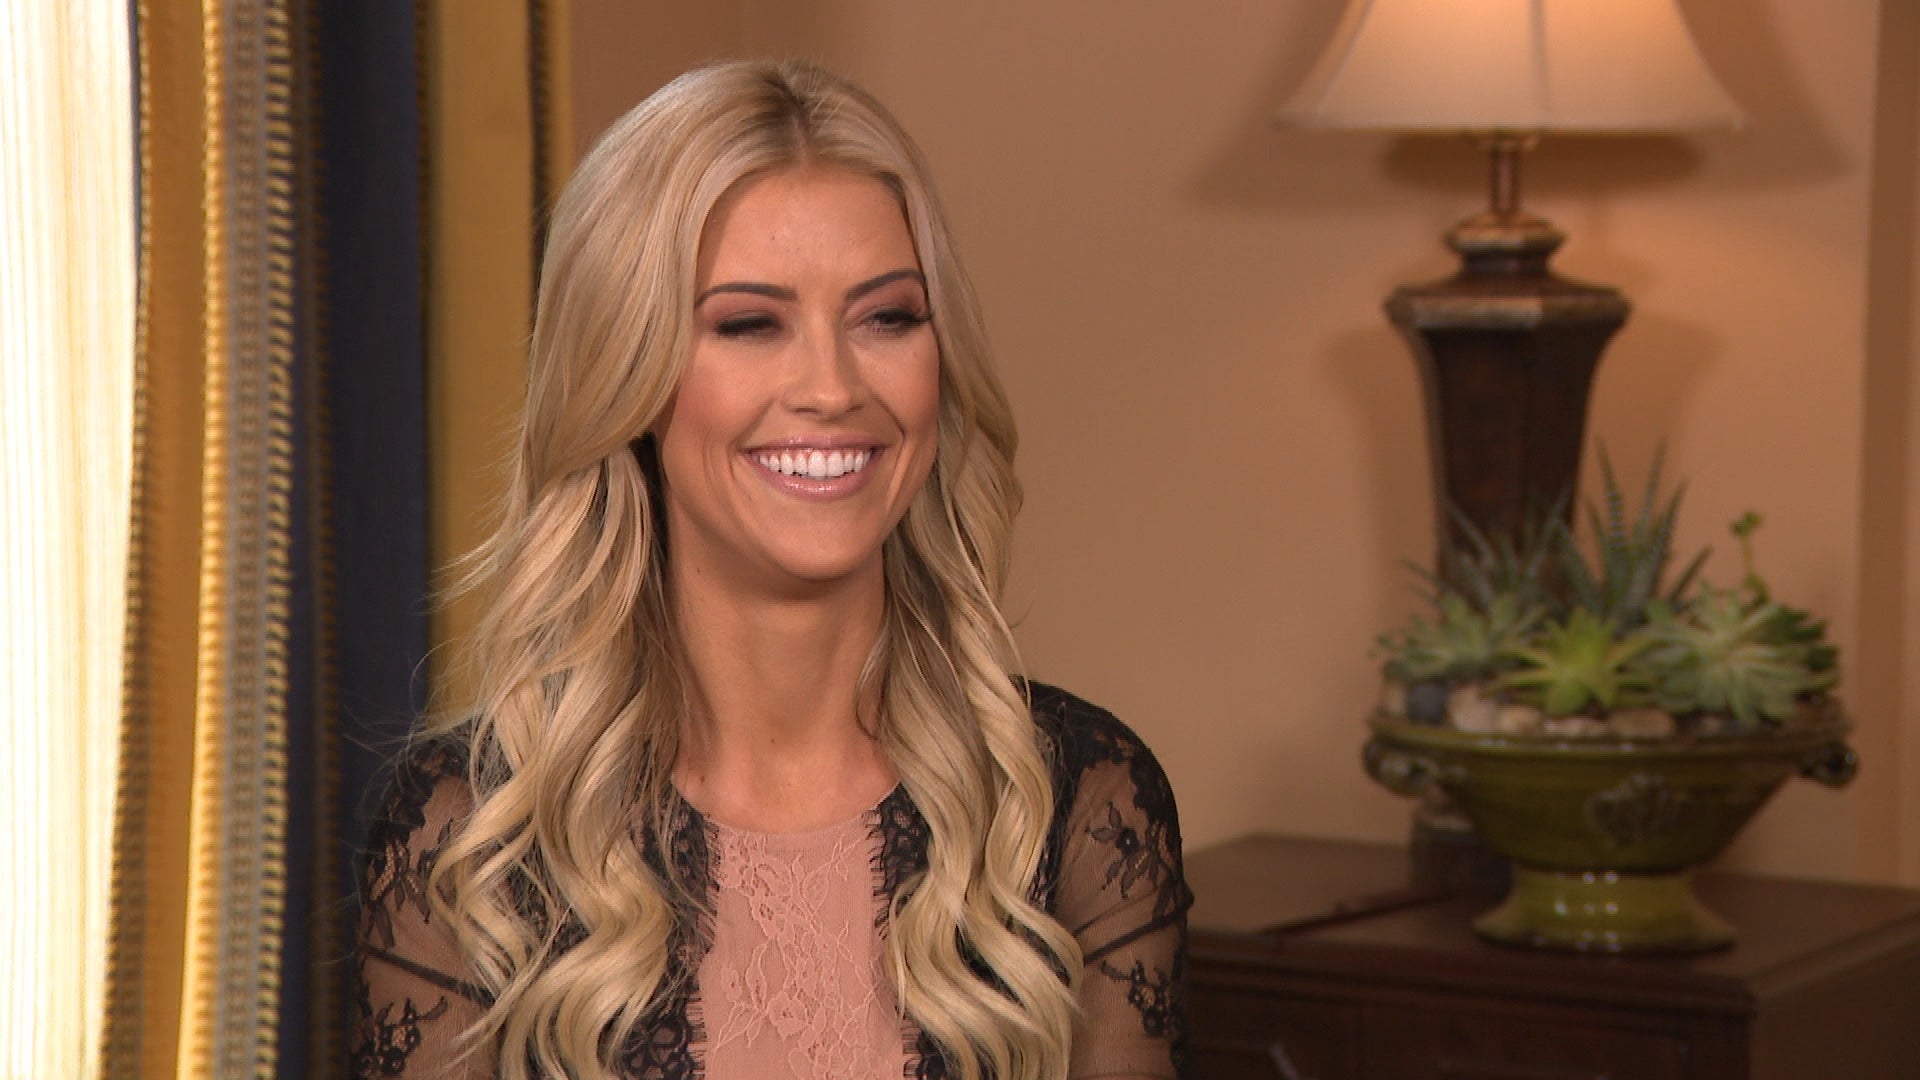 Christina El Moussa Says Her New Hgtv Show Will Feature Her Engagement And Wedding Exclusive Entertainment Tonight,What Do The Different Heart Colors Mean On Facebook